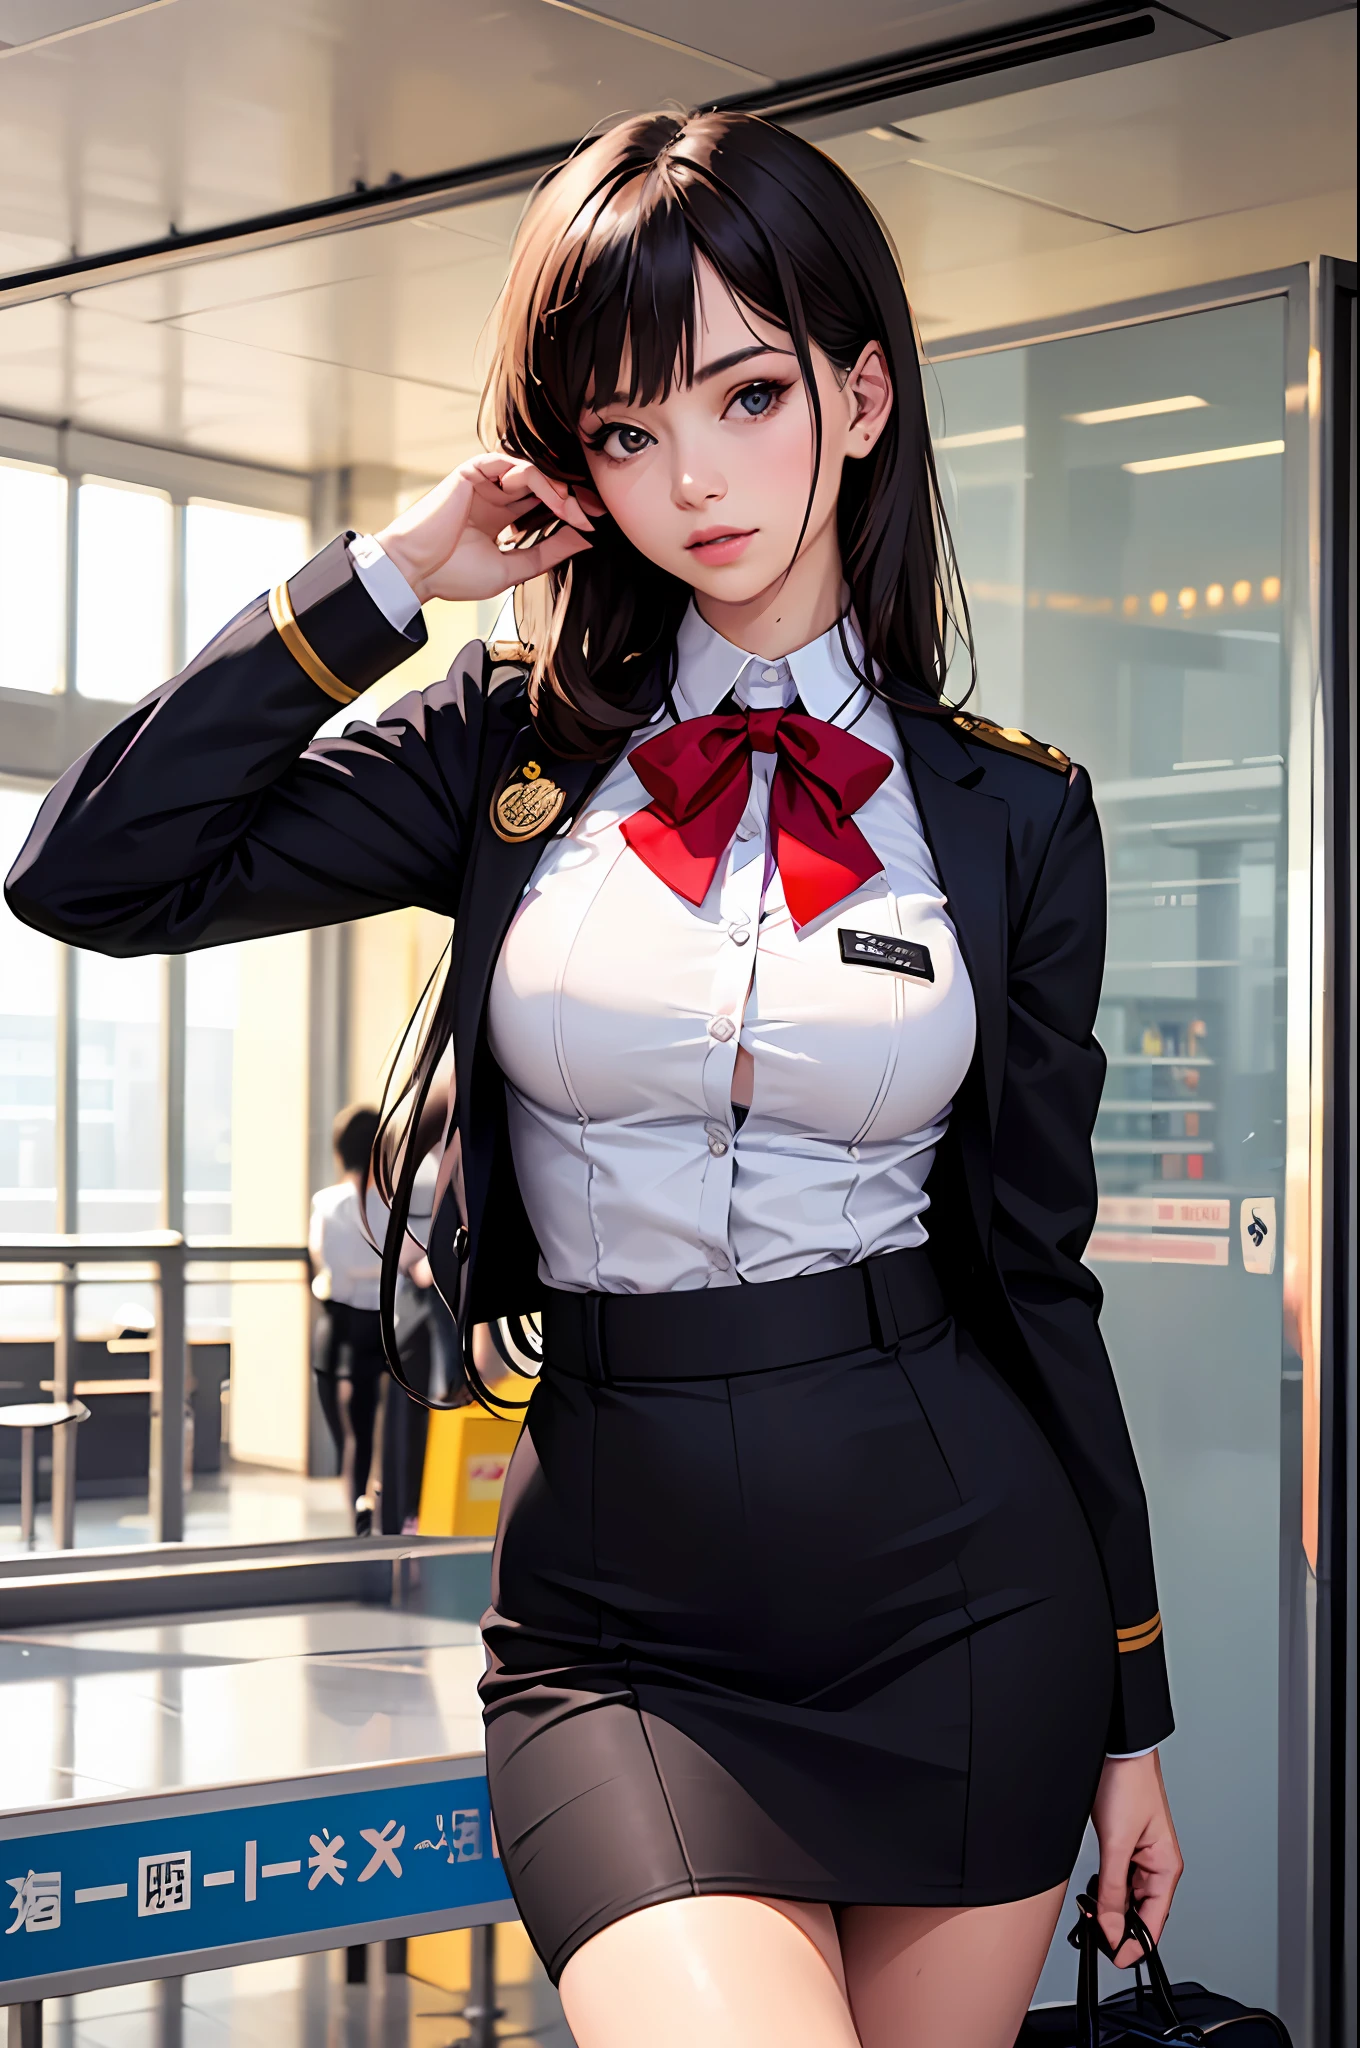 (8k, Best quality, tmasterpiece:1.2), (realisticlying, photo-realistic:1.2), (ultra highres), (Ultra detailded), 1fille, beau visage, corps parfaits,seins moyens, (stewardess uniform, Minijupe:1.2, Culotte), collants, Badges, jambes minces, 20ans, detailed skin, Regarder le spectateur, in the airport, marchant